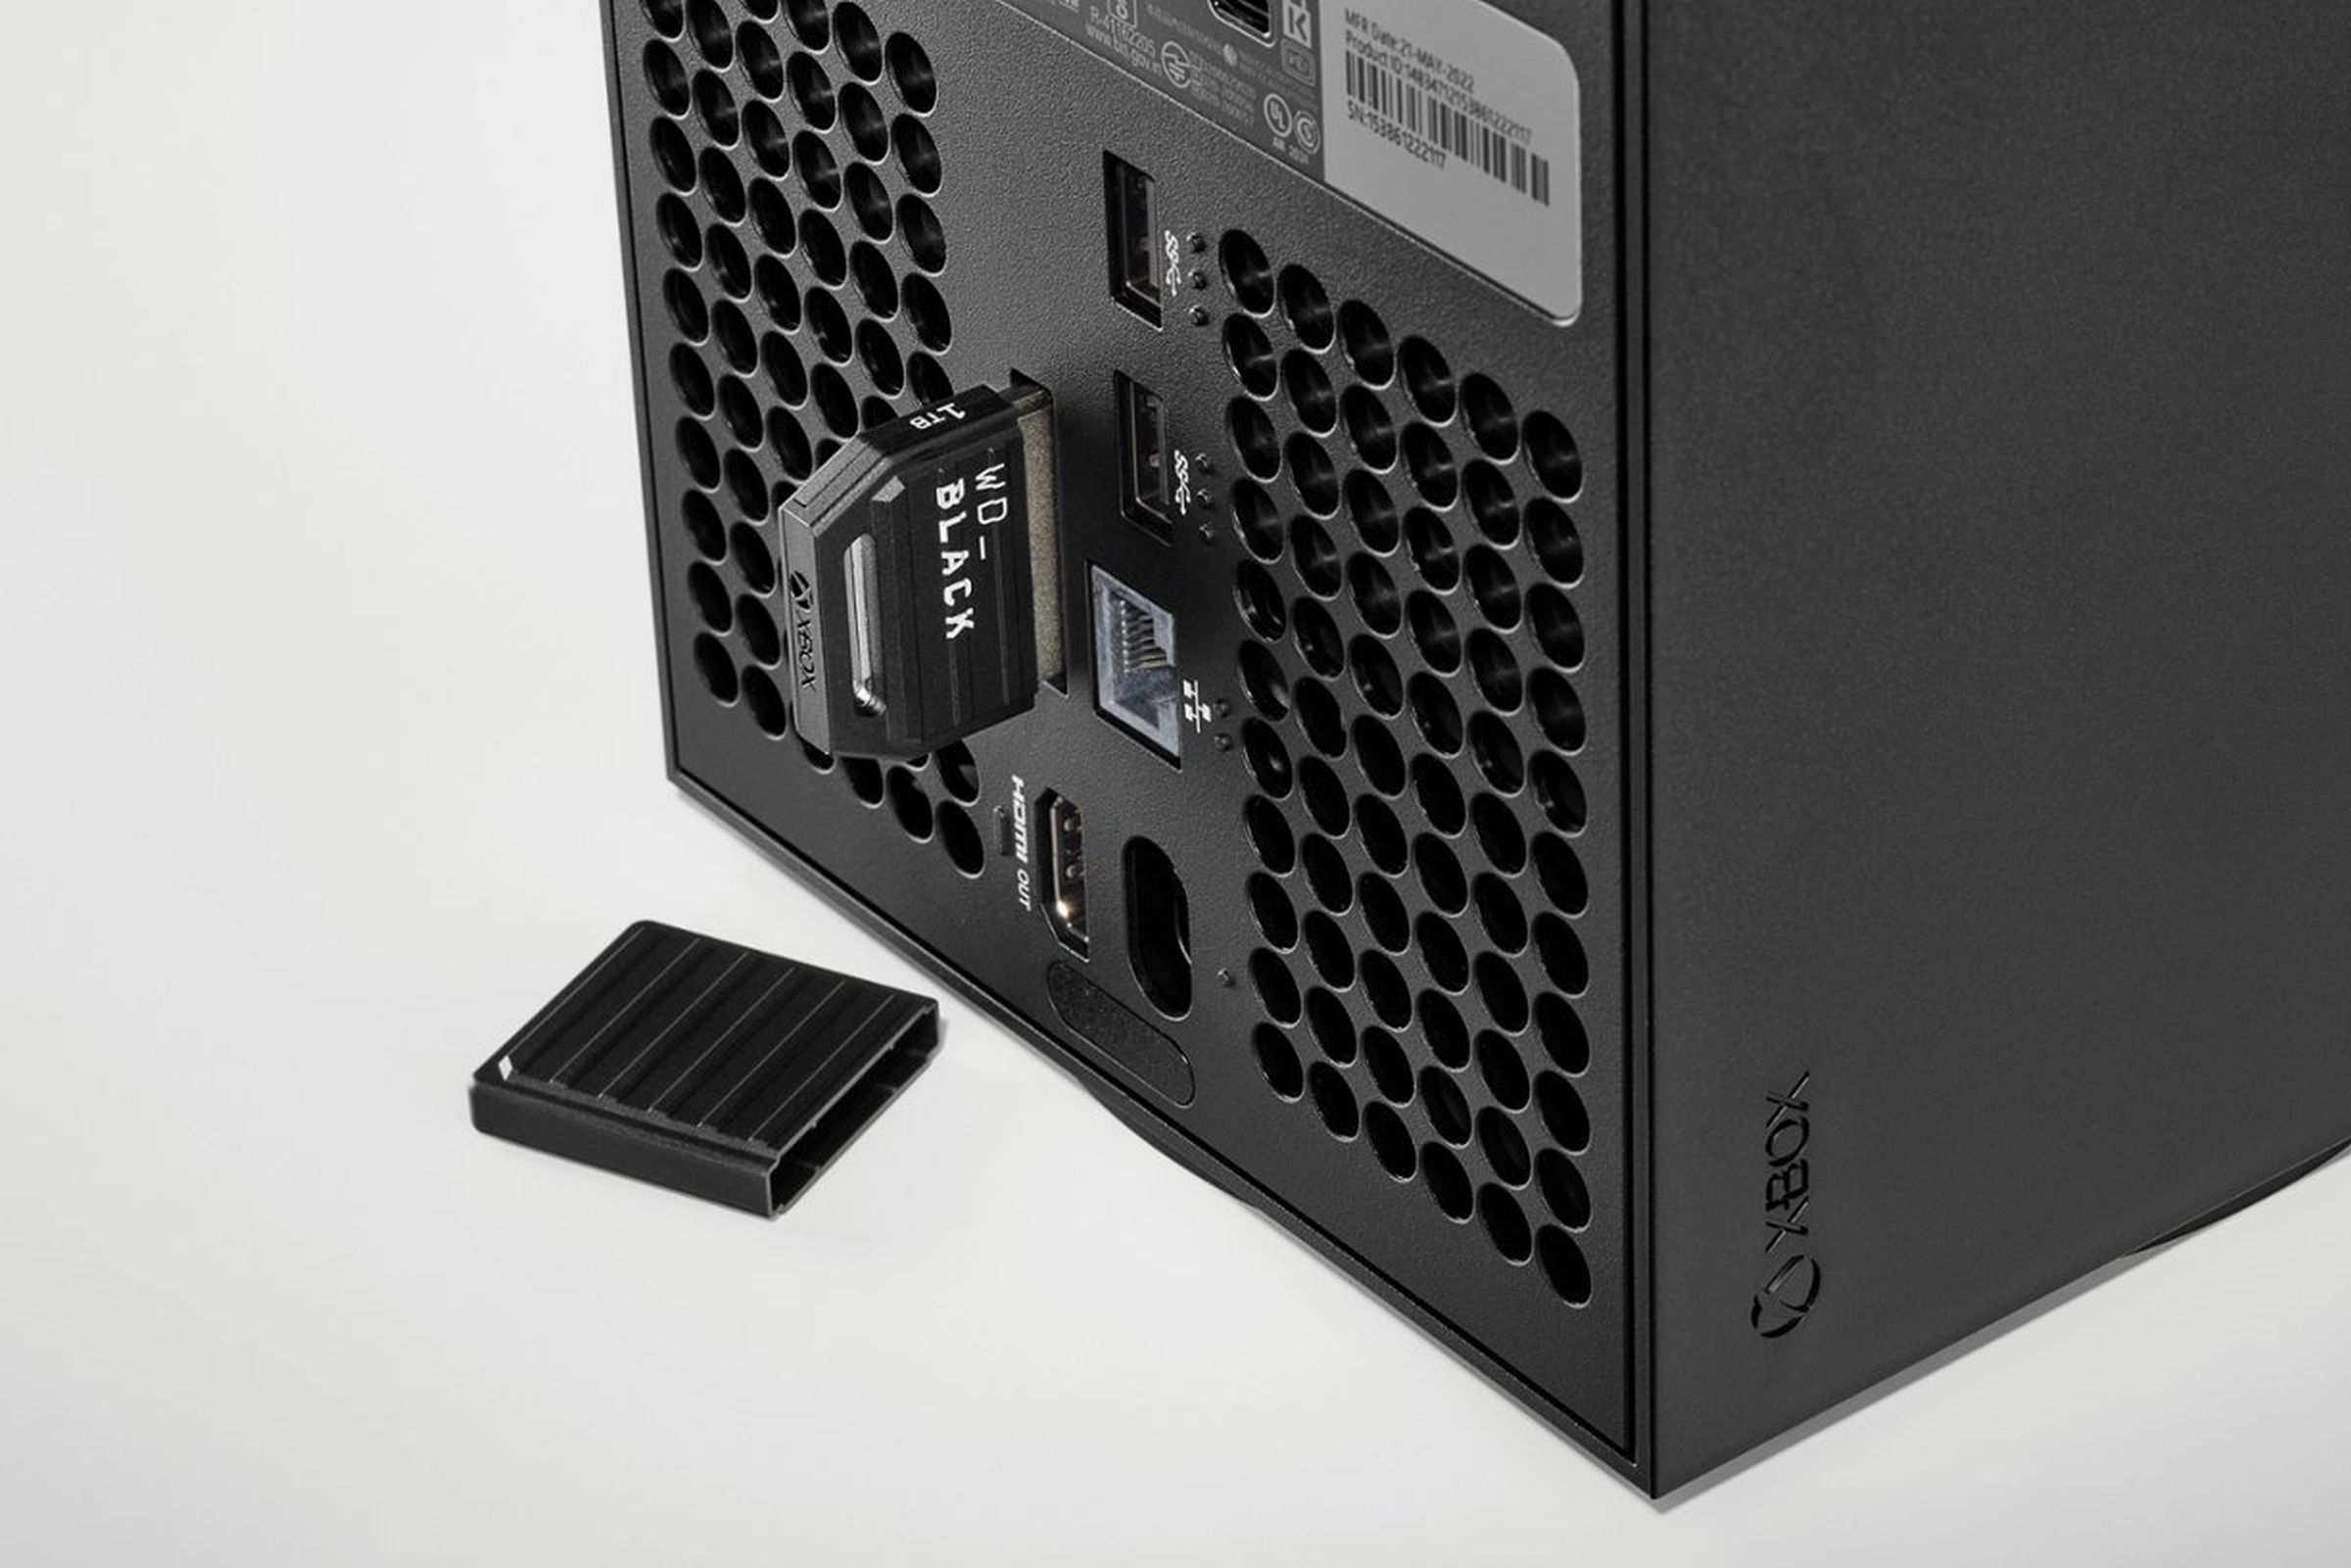 Western Digital’s Xbox expandable storage also works with the Xbox Series X.